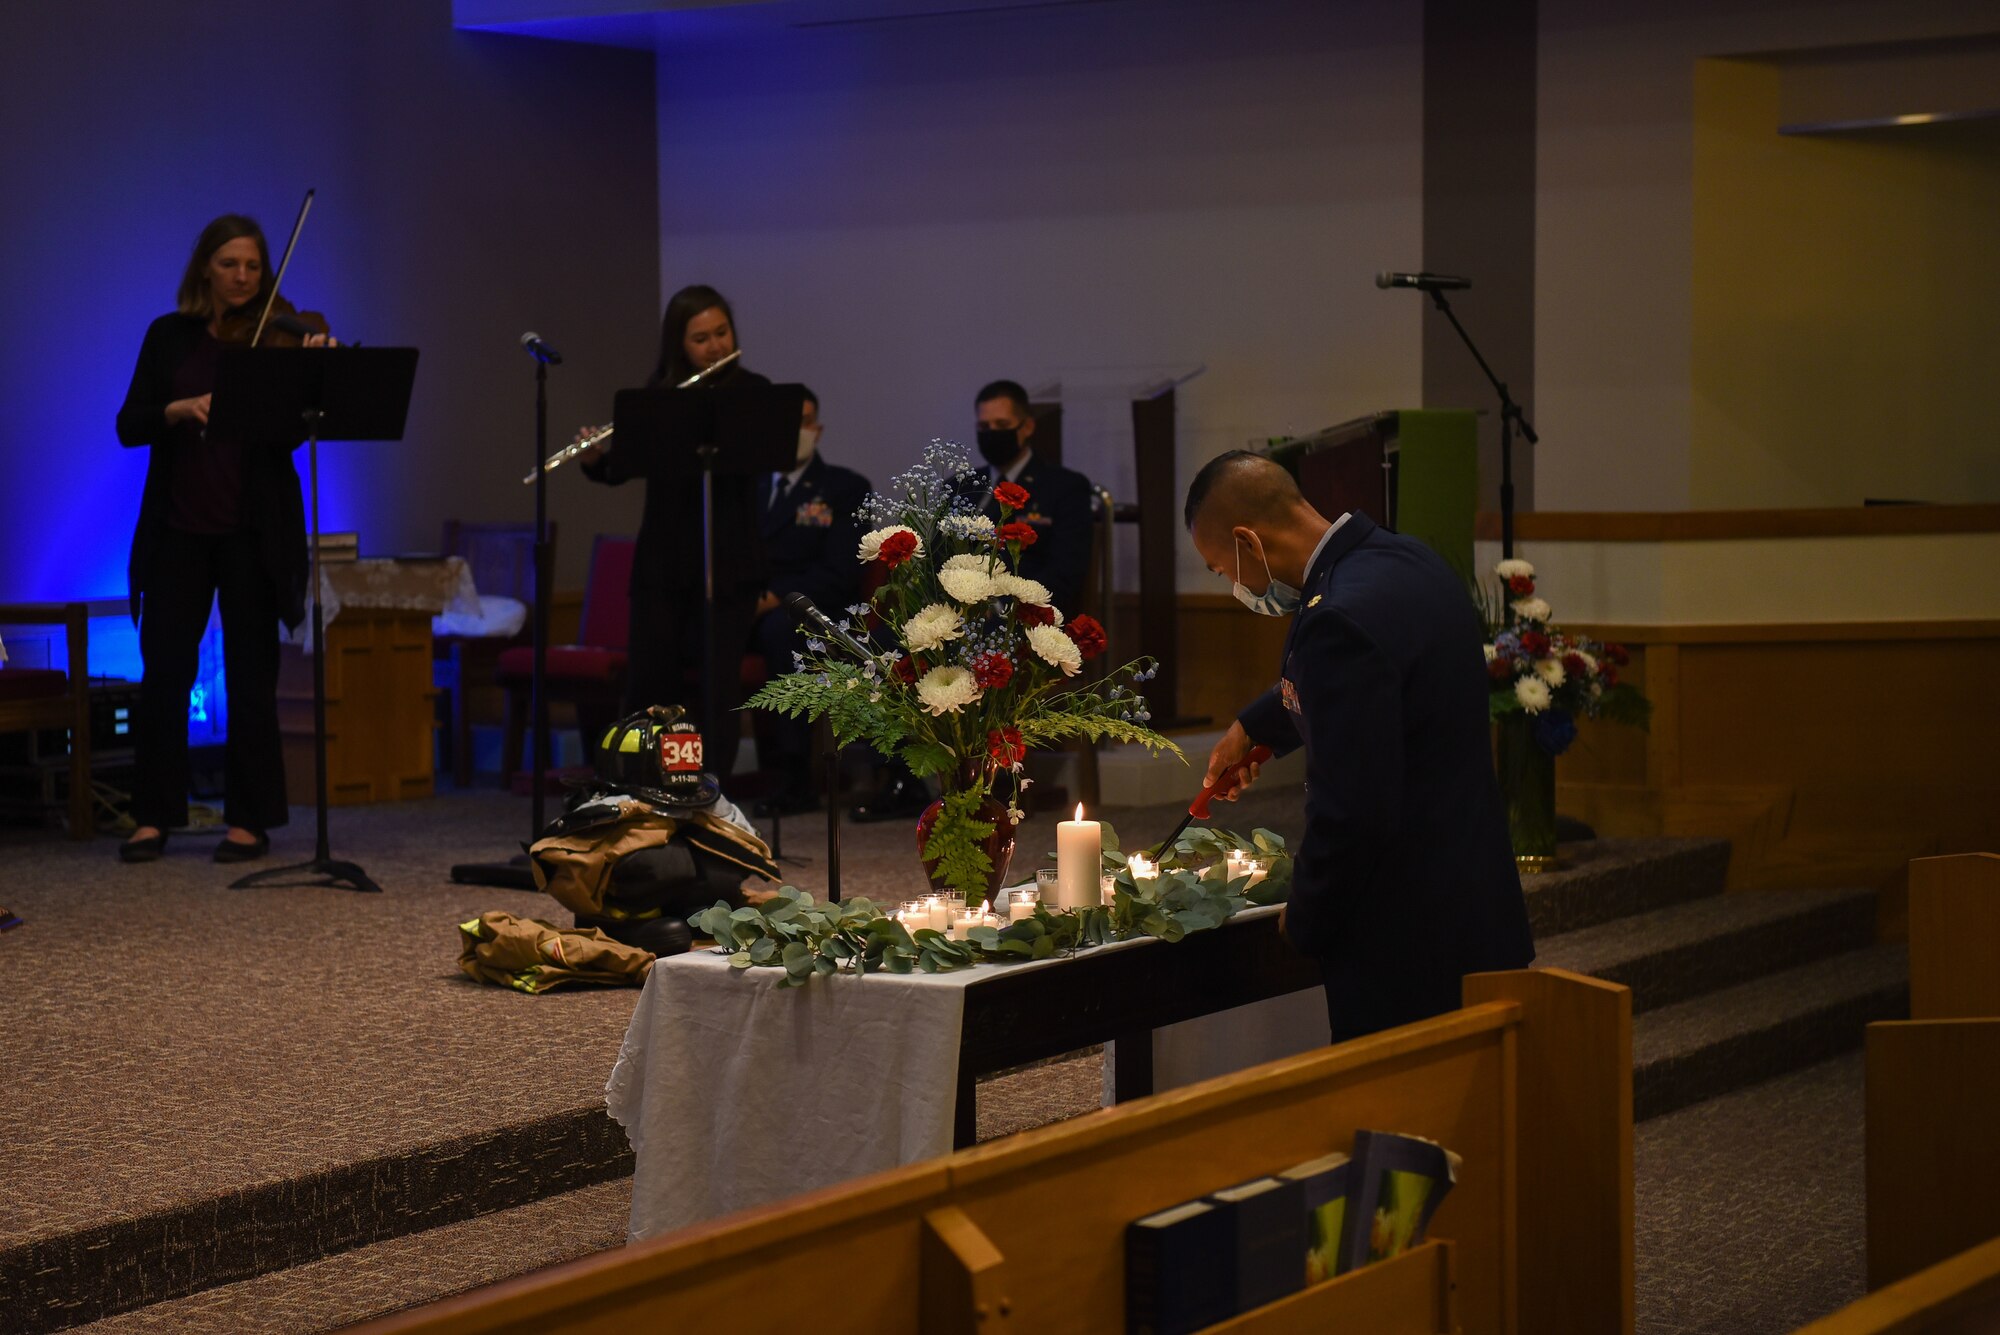 A military chaplain lights a candle while a flute and a violin are being played in the back